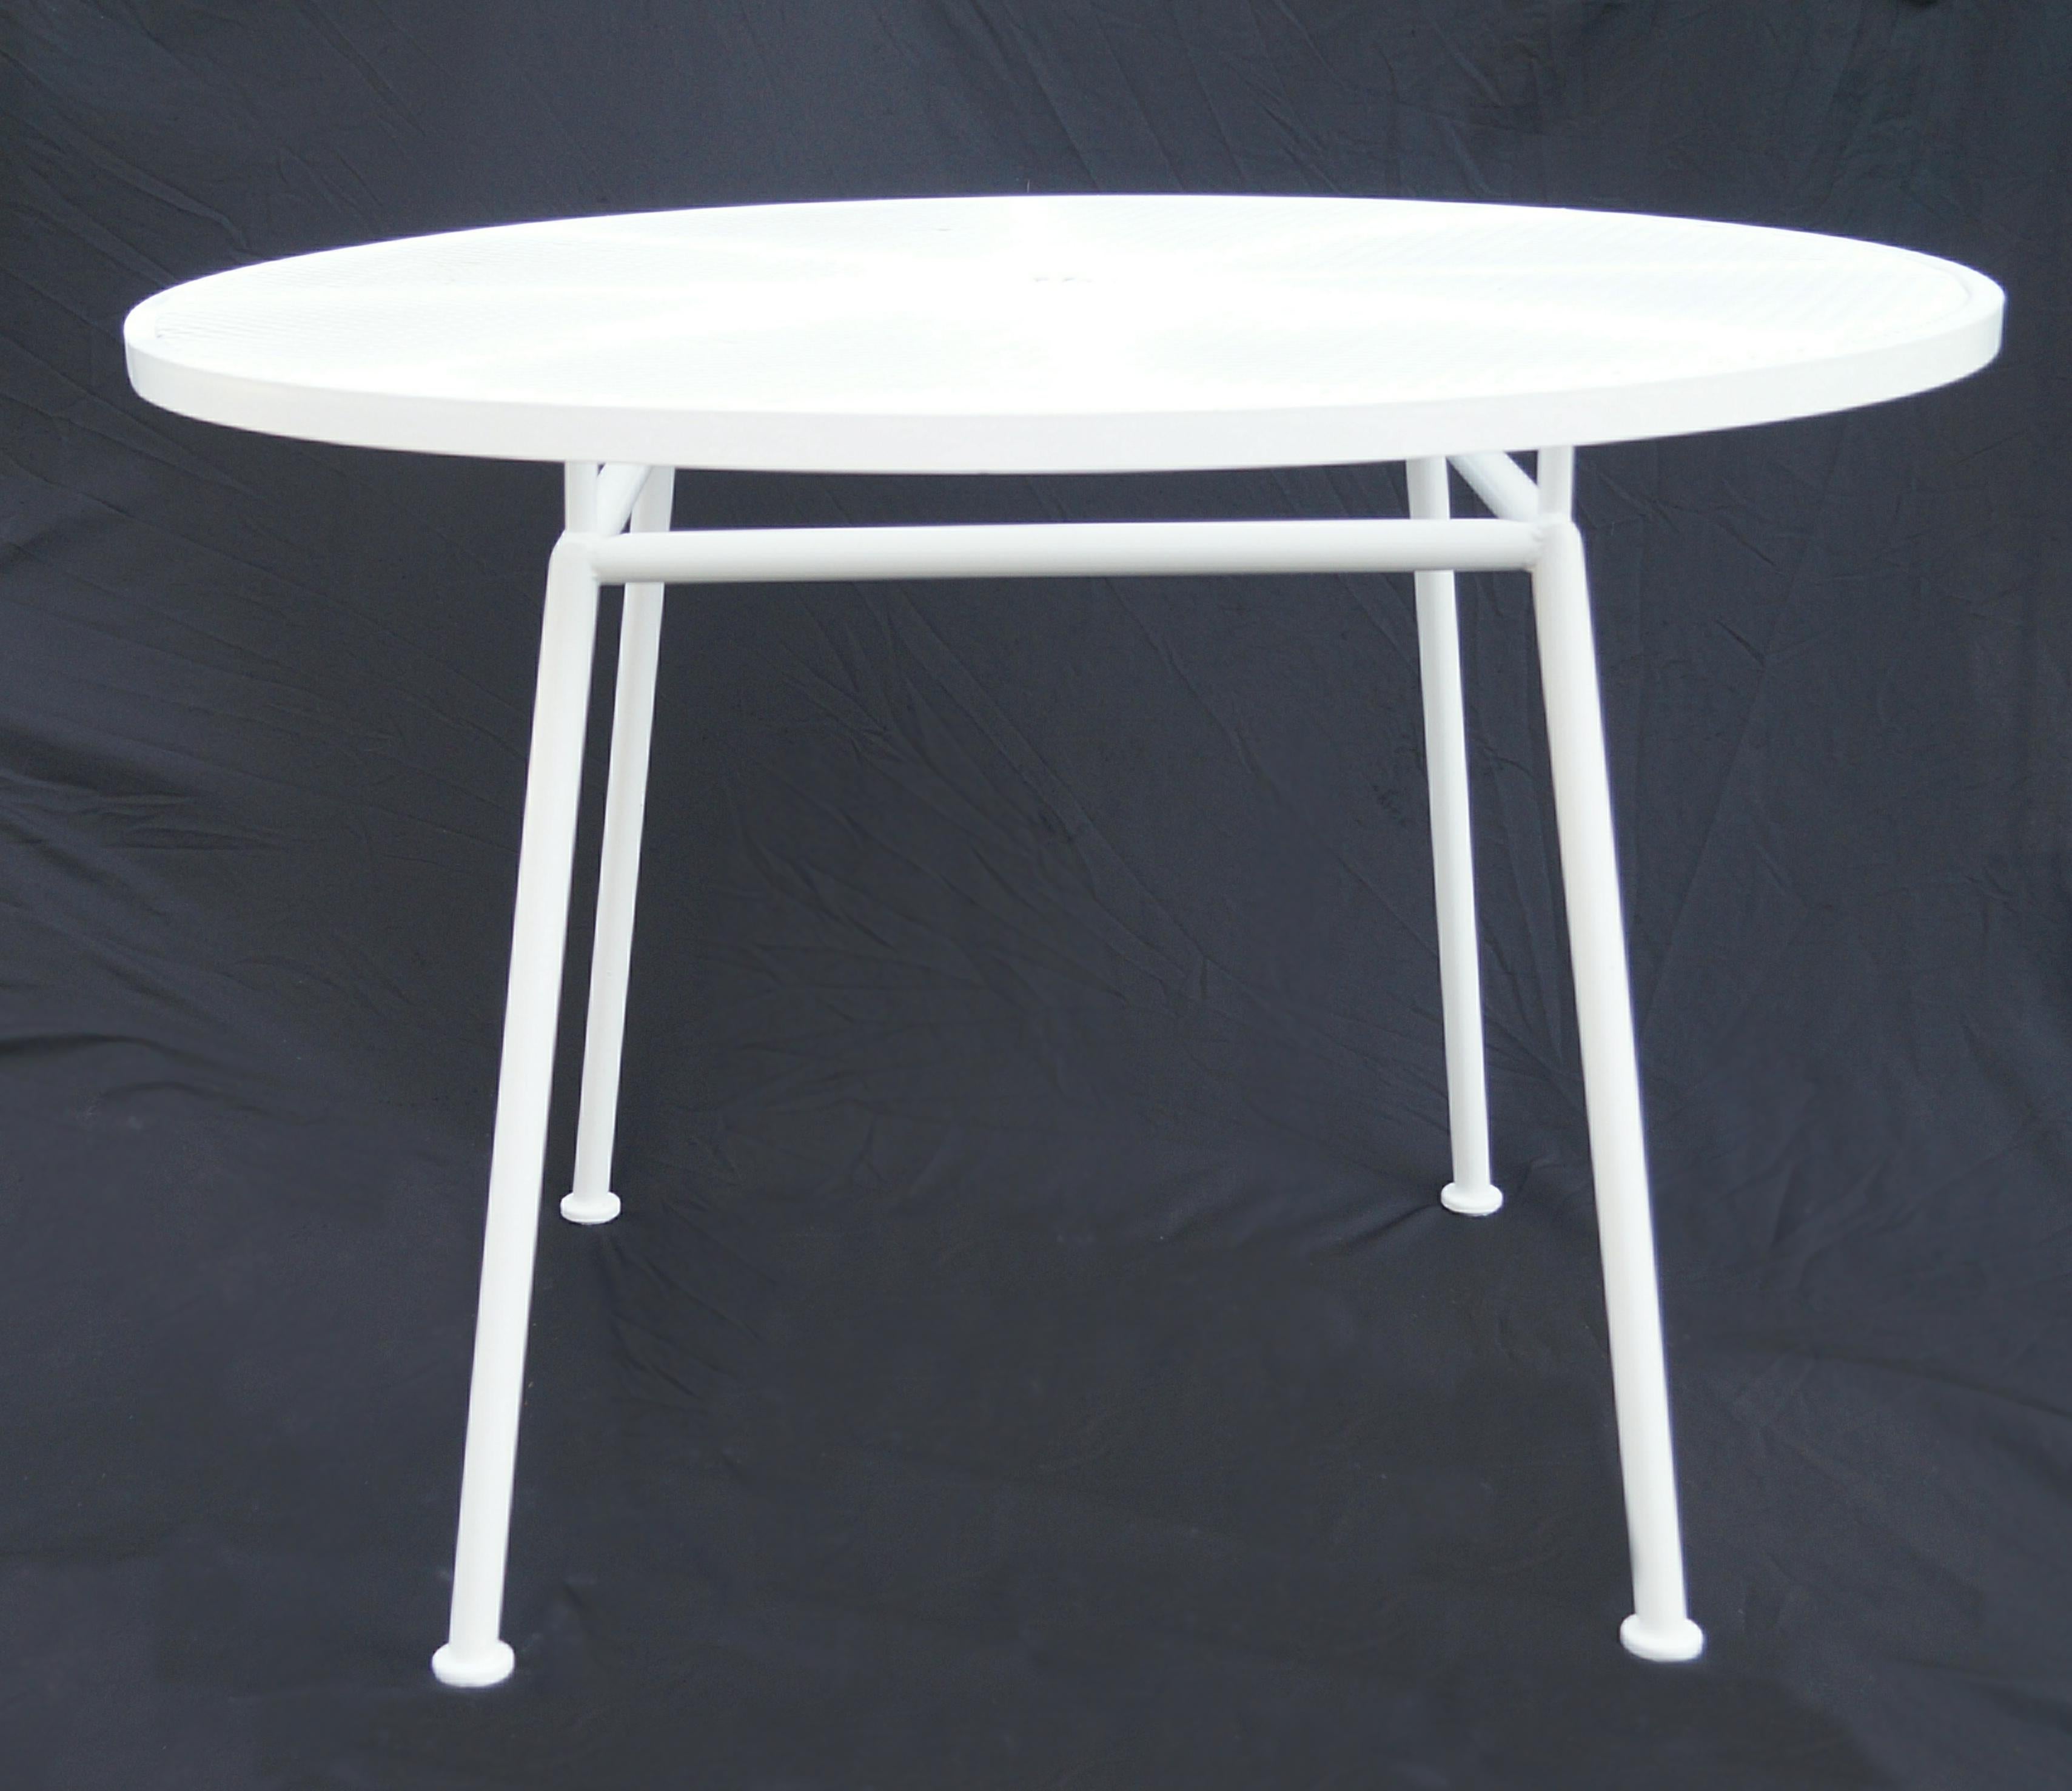 Russell Woodard Sculptura Wrought Iron Round Dining Table Mid Century Modern  
If you are in the New Jersey, New York City Metro Area, please contact us with your delivery zipcode, as we may be able to deliver curbside for less than the calculated